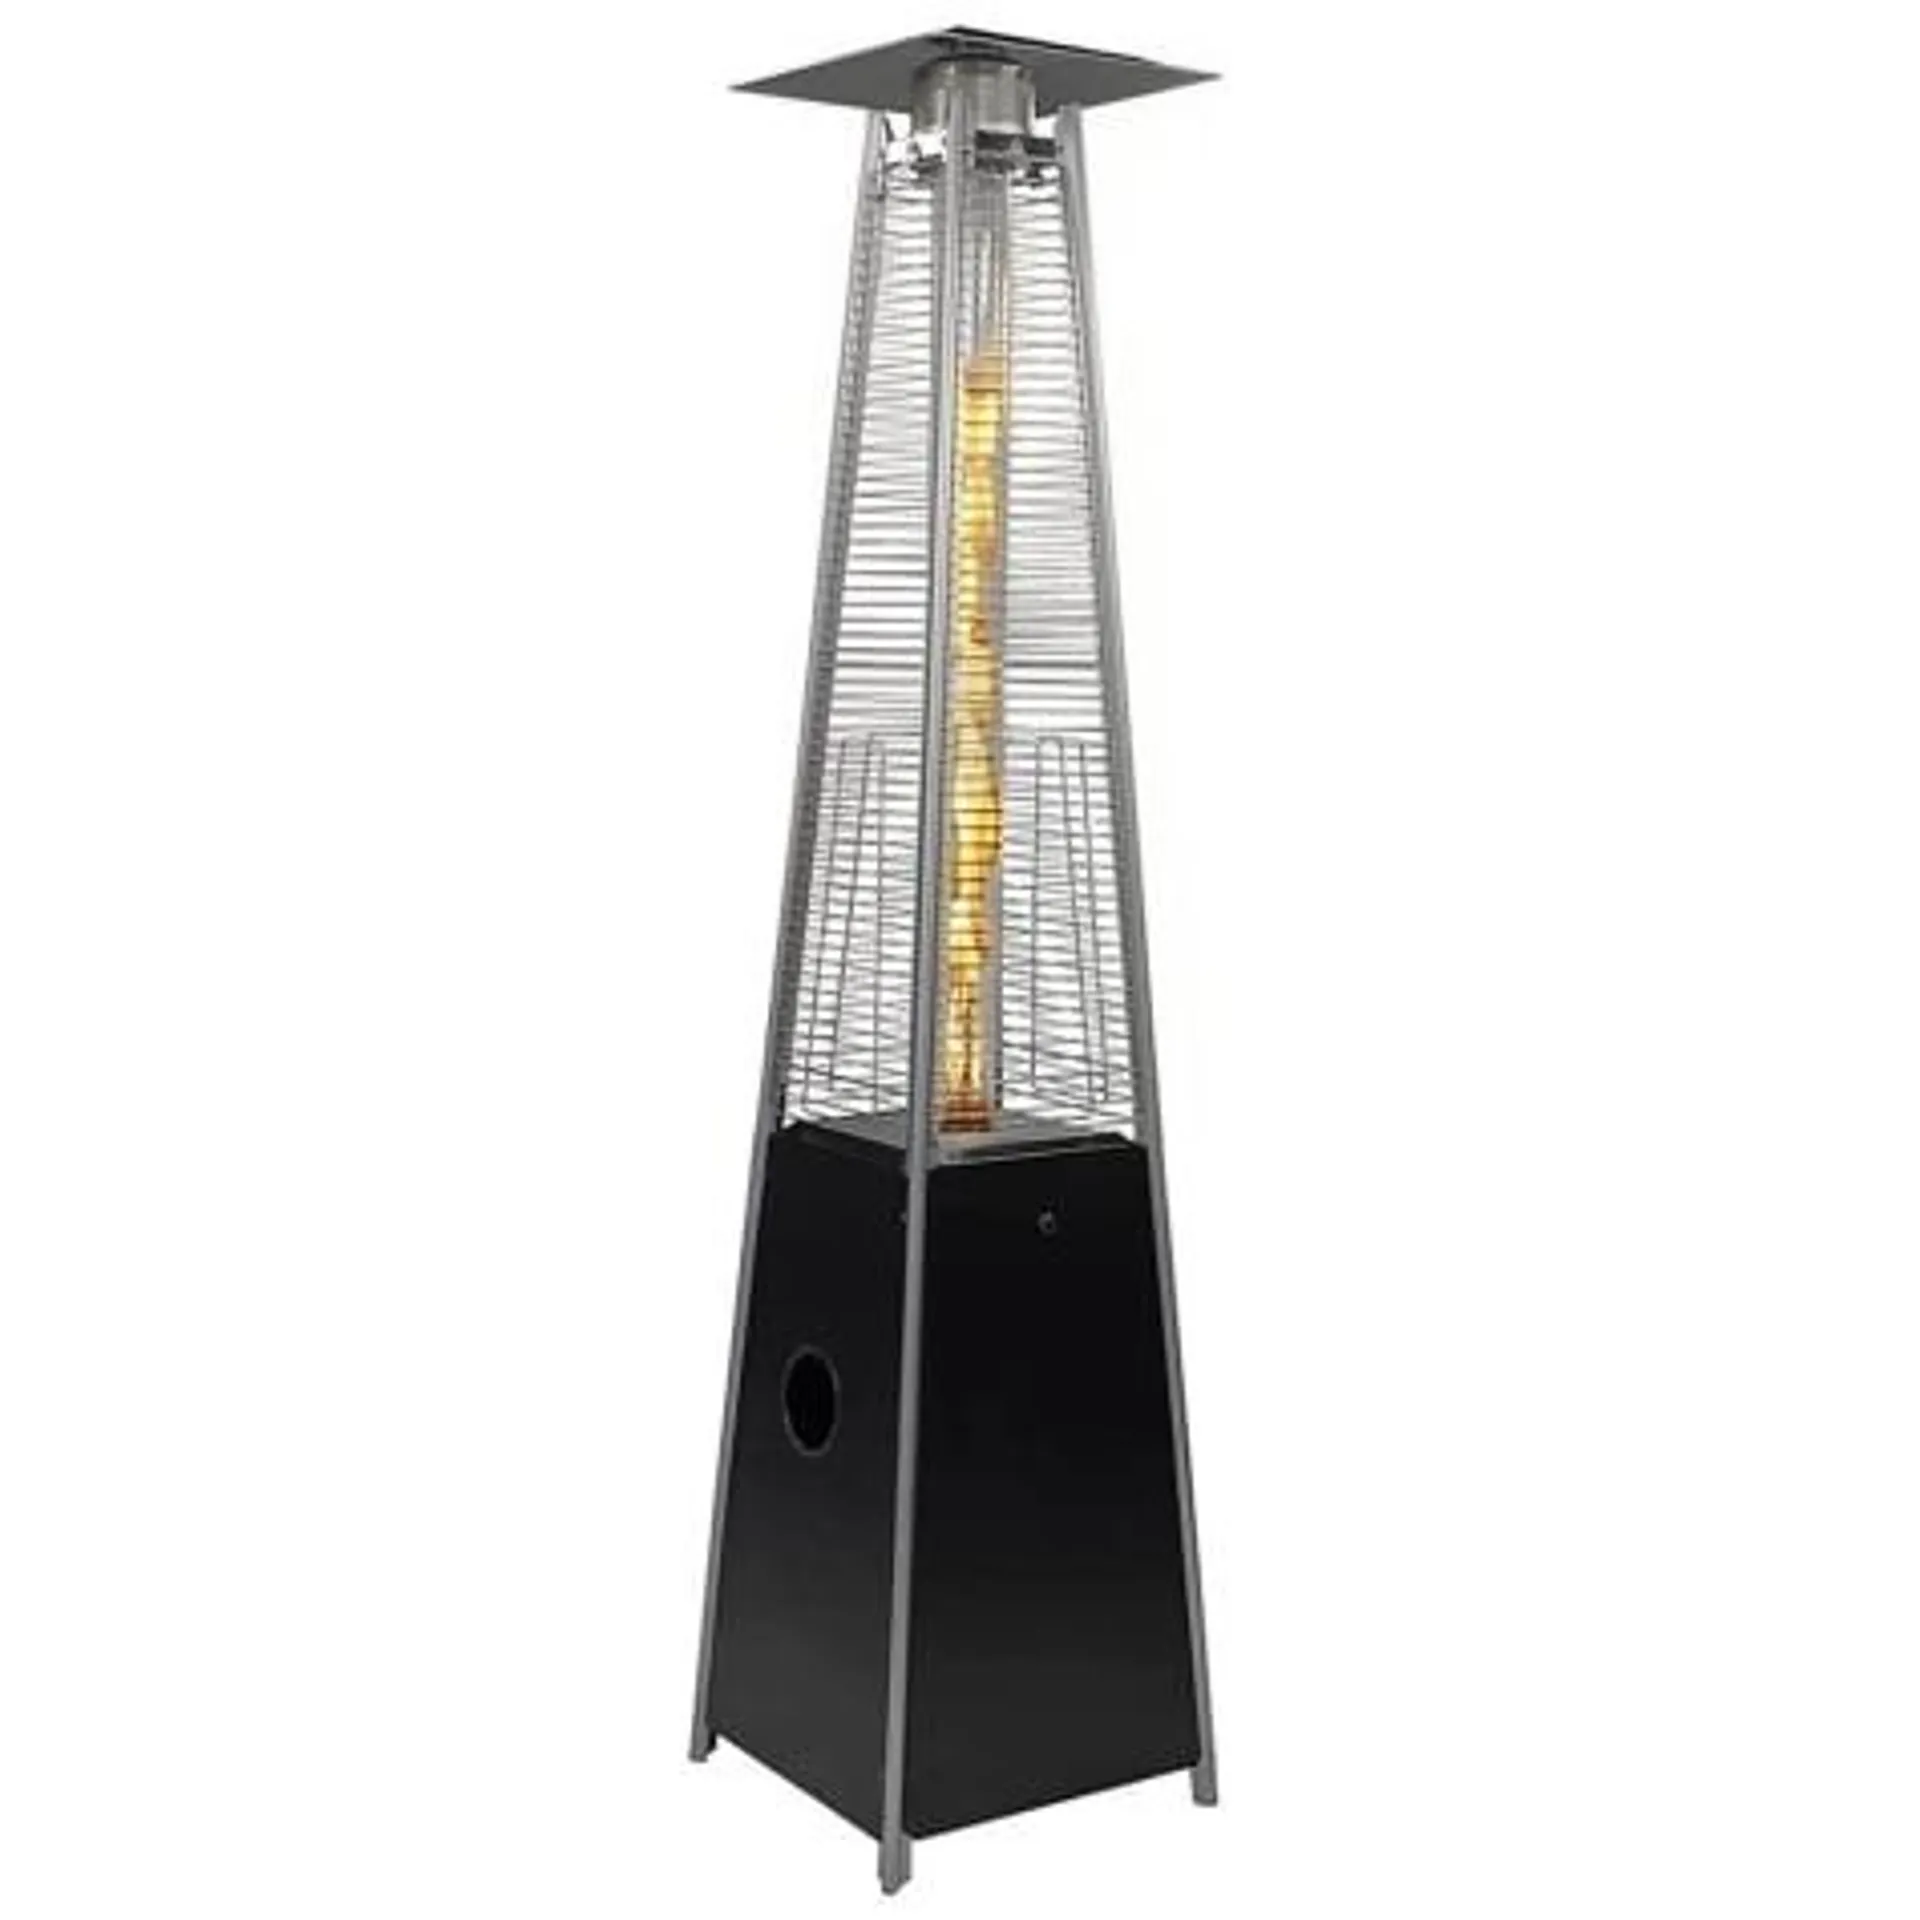 Laurel Canyon Pyramid Outdoor Propane Patio Heater with Glass Tube Flame, 42,000 BTU